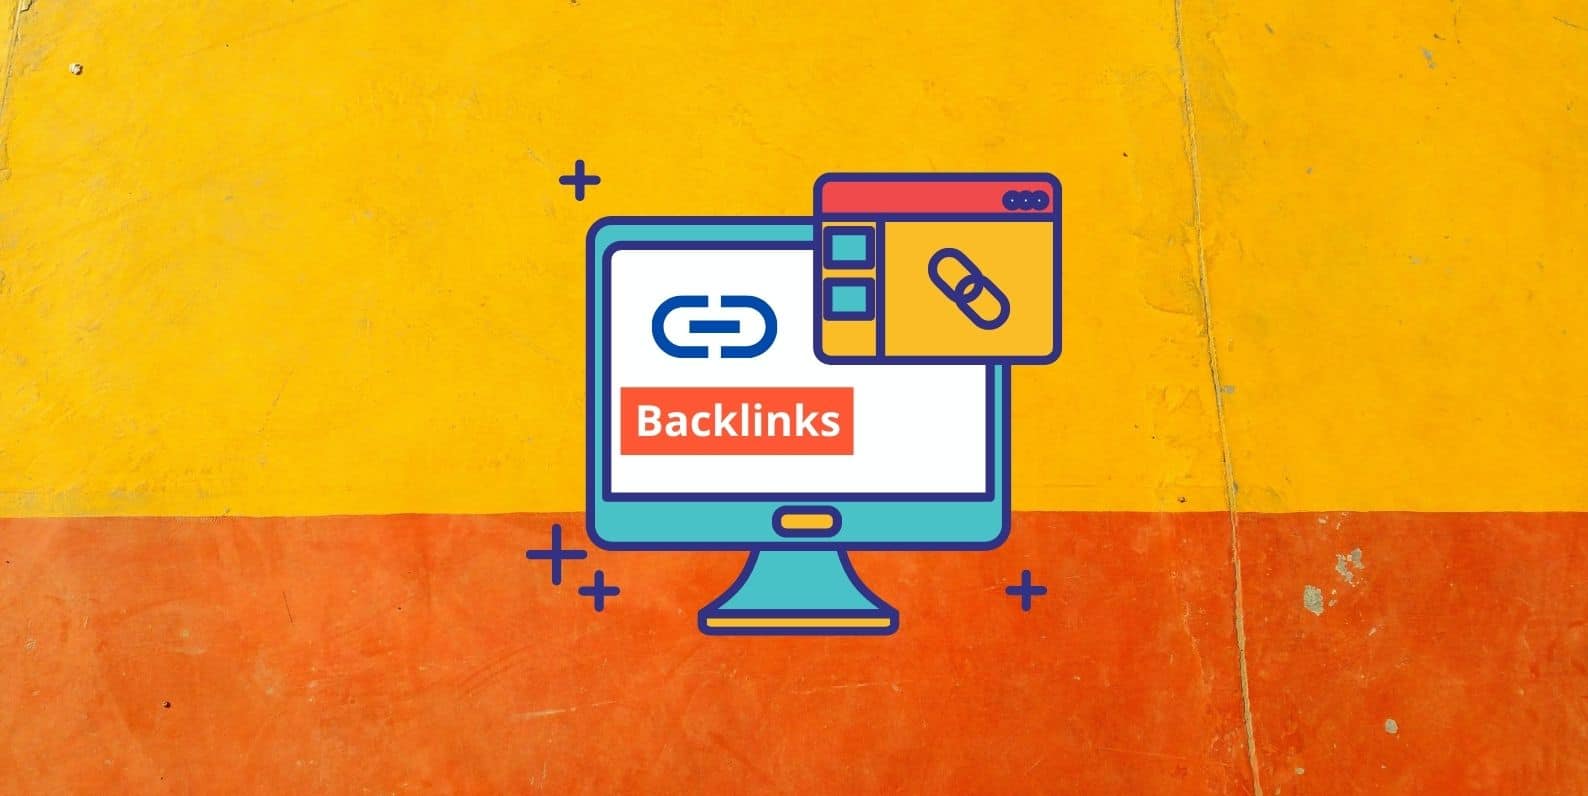 Learn about Backlinks